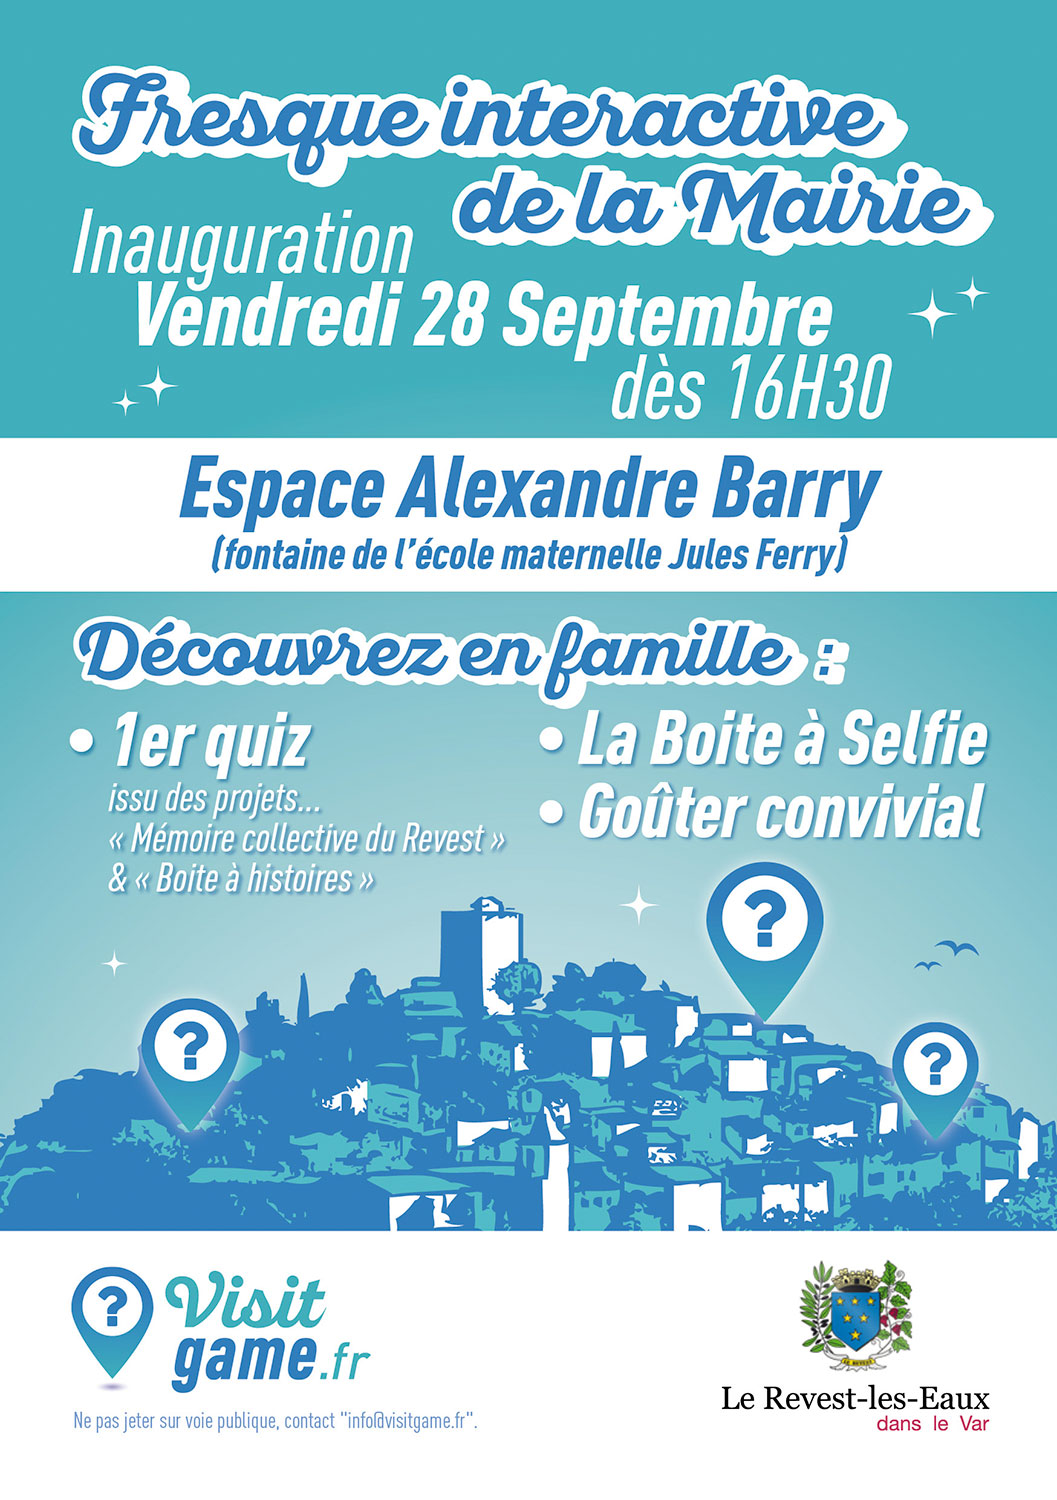 agence-communication-Flyer-A5-Inauguration-Mairie